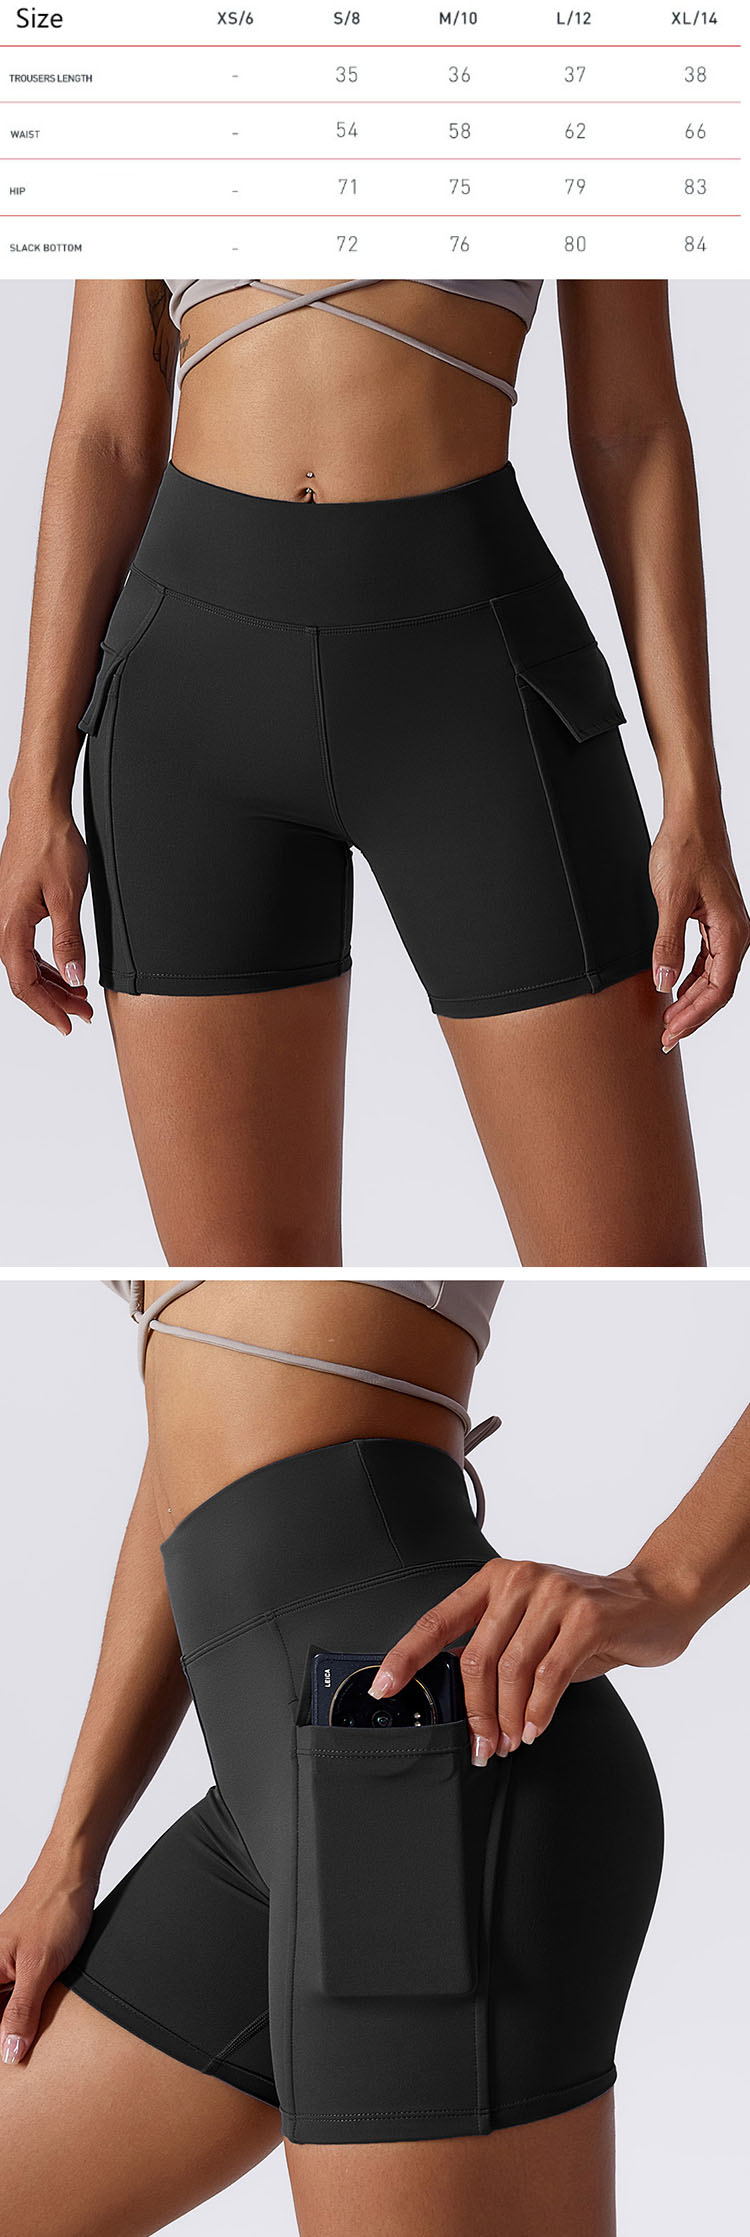 Design style of black yoga pants with pockets is changeable